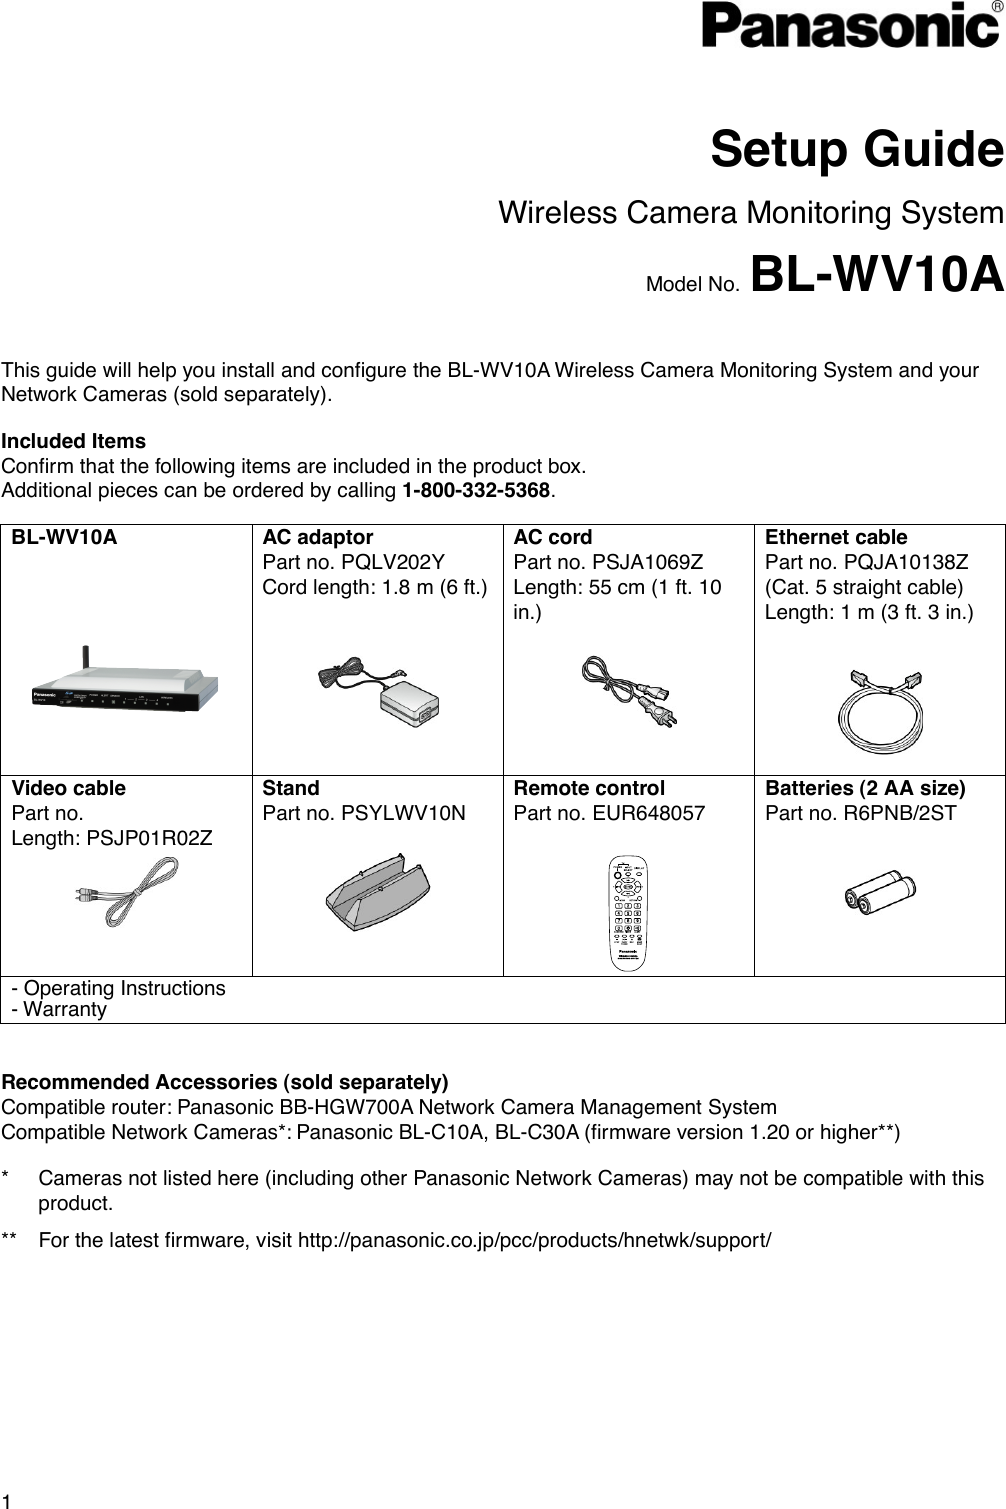 1   Setup Guide Wireless Camera Monitoring System Model No. BL-WV10A  This guide will help you install and configure the BL-WV10A Wireless Camera Monitoring System and your Network Cameras (sold separately). Included Items Confirm that the following items are included in the product box. Additional pieces can be ordered by calling 1-800-332-5368. BL-WV10A  AC adaptor Part no. PQLV202Y Cord length: 1.8 m (6 ft.) AC cord Part no. PSJA1069Z Length: 55 cm (1 ft. 10 in.)  Ethernet cable Part no. PQJA10138Z (Cat. 5 straight cable) Length: 1 m (3 ft. 3 in.)      Video cable Part no. Length: PSJP01R02Z Stand Part no. PSYLWV10N Remote control Part no. EUR648057 Batteries (2 AA size) Part no. R6PNB/2ST     - Operating Instructions- Warranty Recommended Accessories (sold separately) Compatible router: Panasonic BB-HGW700A Network Camera Management System   Compatible Network Cameras*: Panasonic BL-C10A, BL-C30A (firmware version 1.20 or higher**) *  Cameras not listed here (including other Panasonic Network Cameras) may not be compatible with this product. **  For the latest firmware, visit http://panasonic.co.jp/pcc/products/hnetwk/support/